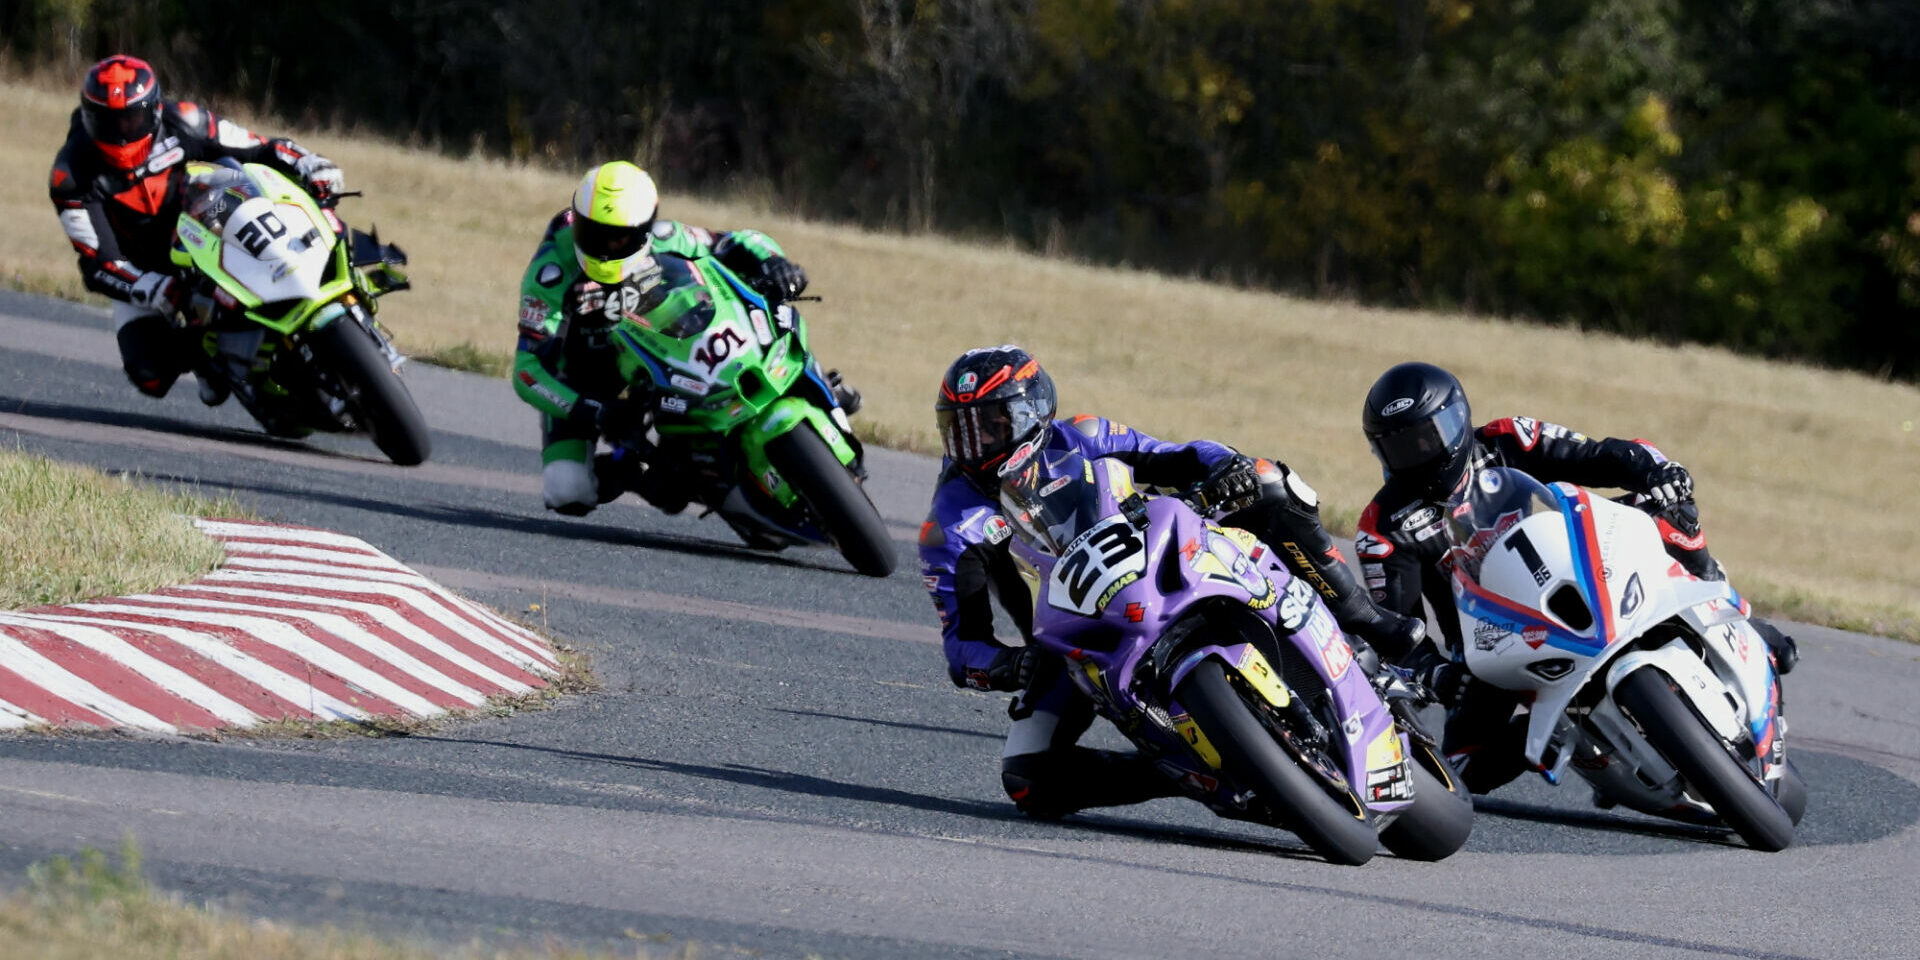 Alex Dumas (23) finished off the season in style, leading Sunday's GP Bikes Pro Superbike race from start to finish at Shannonville Motorsport Park ahead of newly crowned 2023 CSBK champion Ben Young (1) in second and Trevor Dion (20) in third. Jordan Szoke (101) finished fourth. Photo by Rob O'Brien, courtesy CSBK.